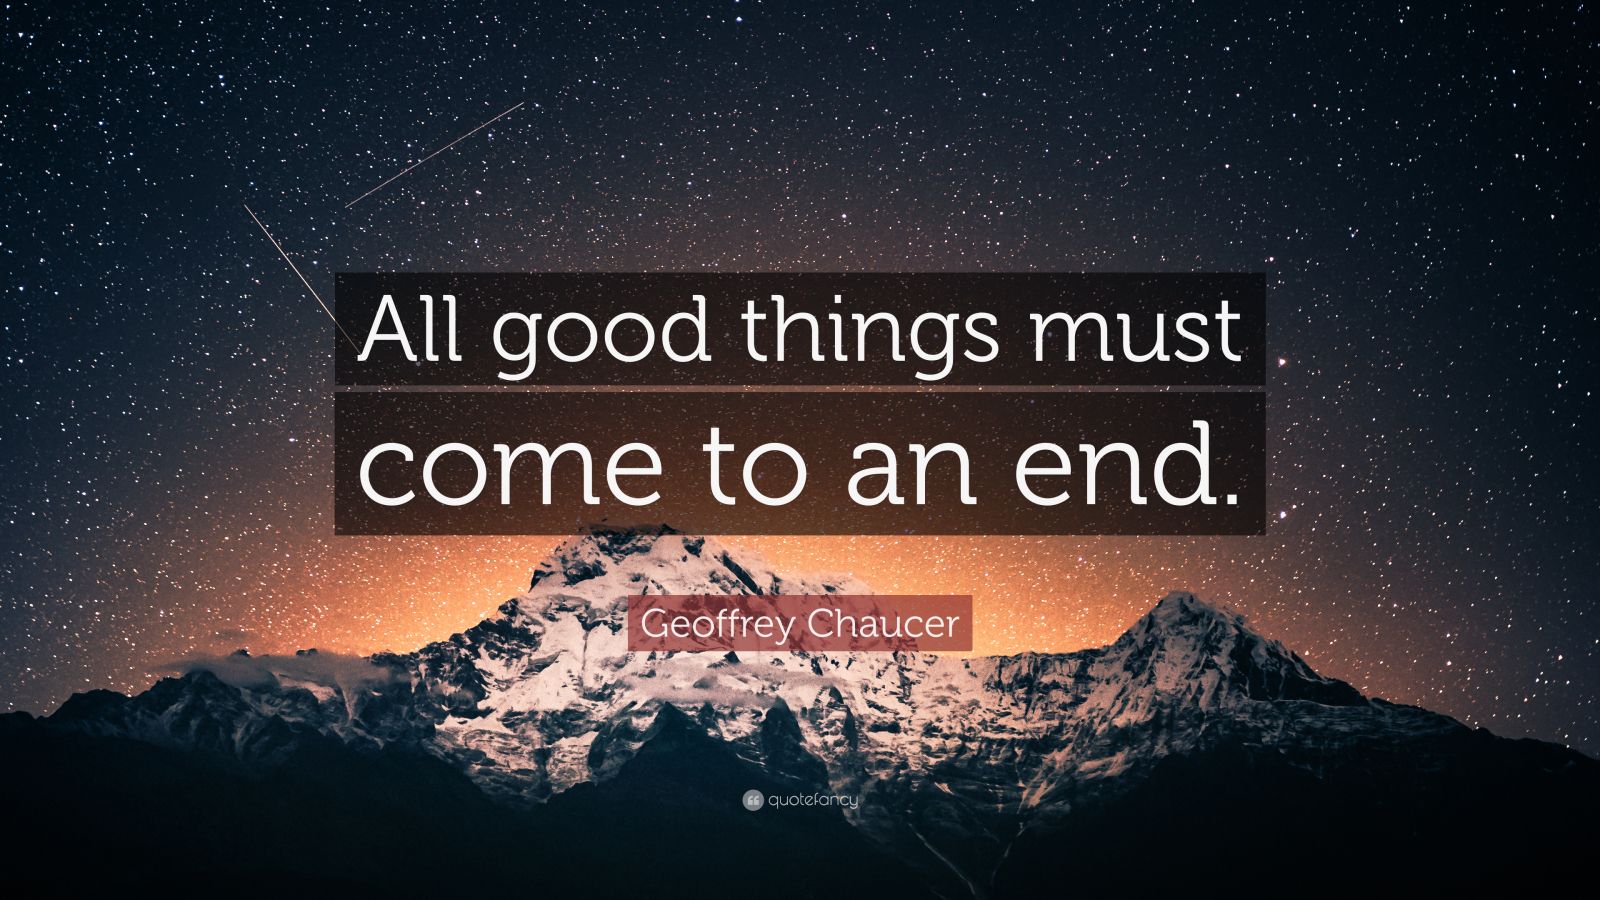 Geoffrey Chaucer Quote: “All good things must come to an end.” (12 wallpapers ...